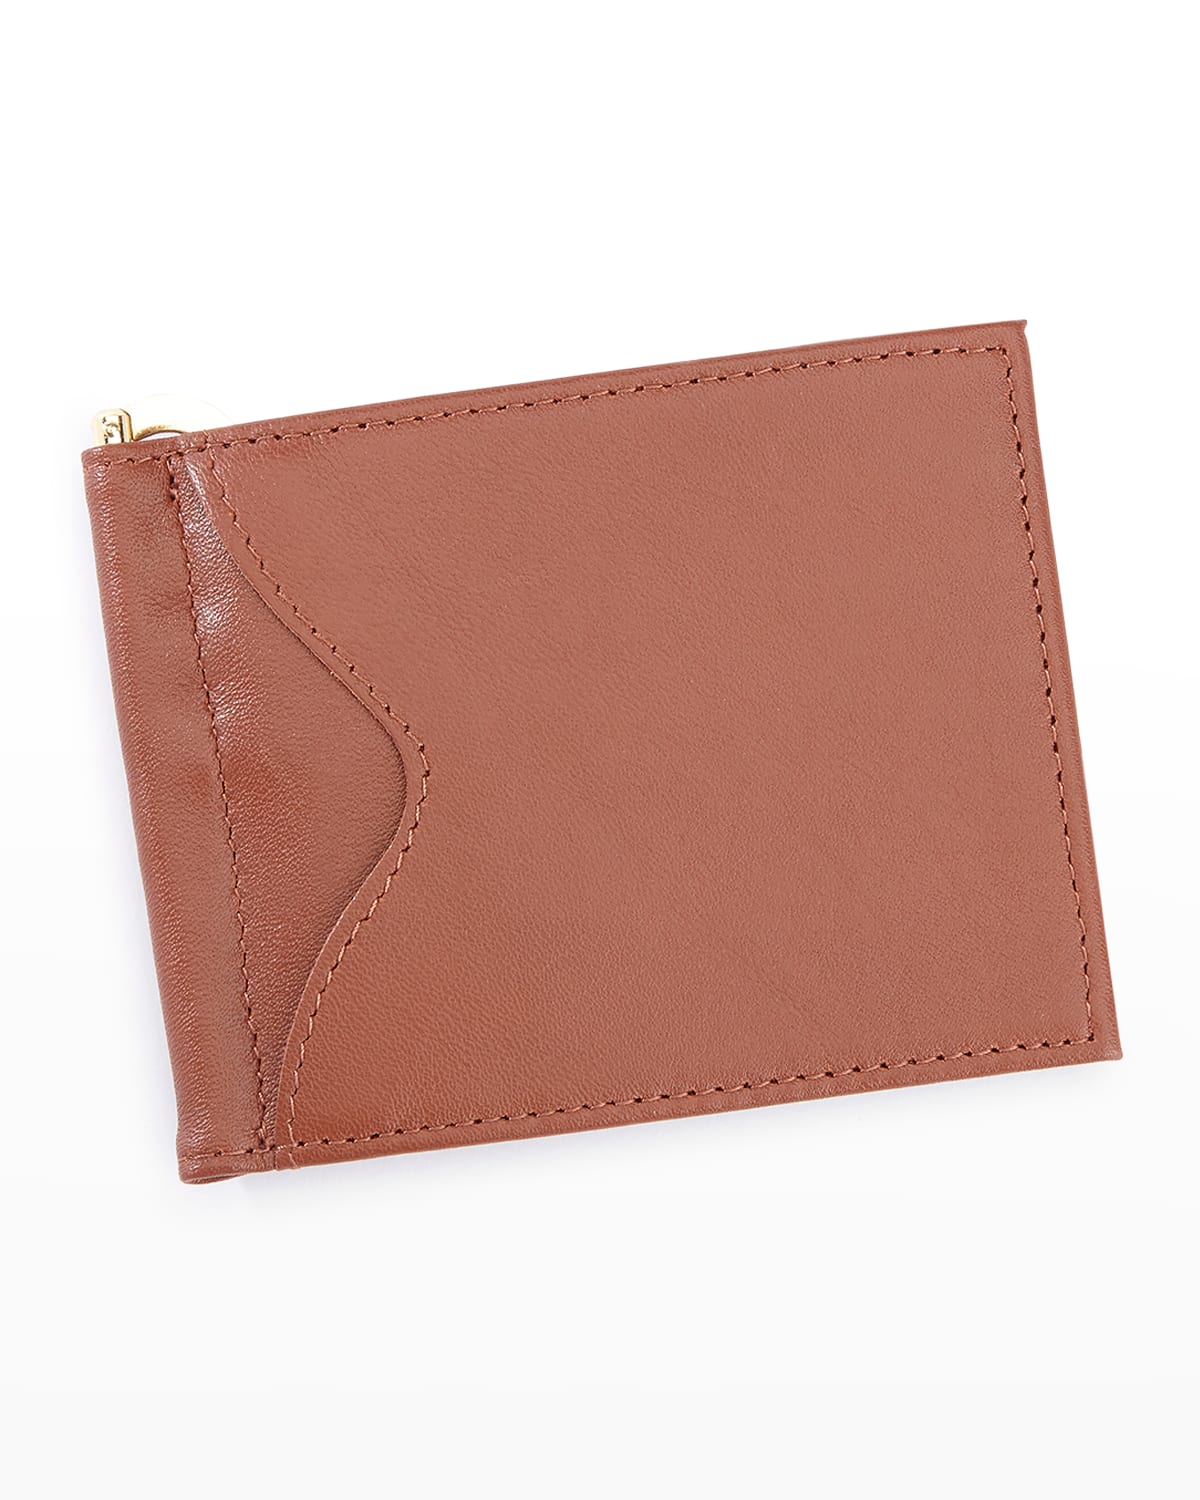 Personalized Leather RFID-Blocking Money Clip